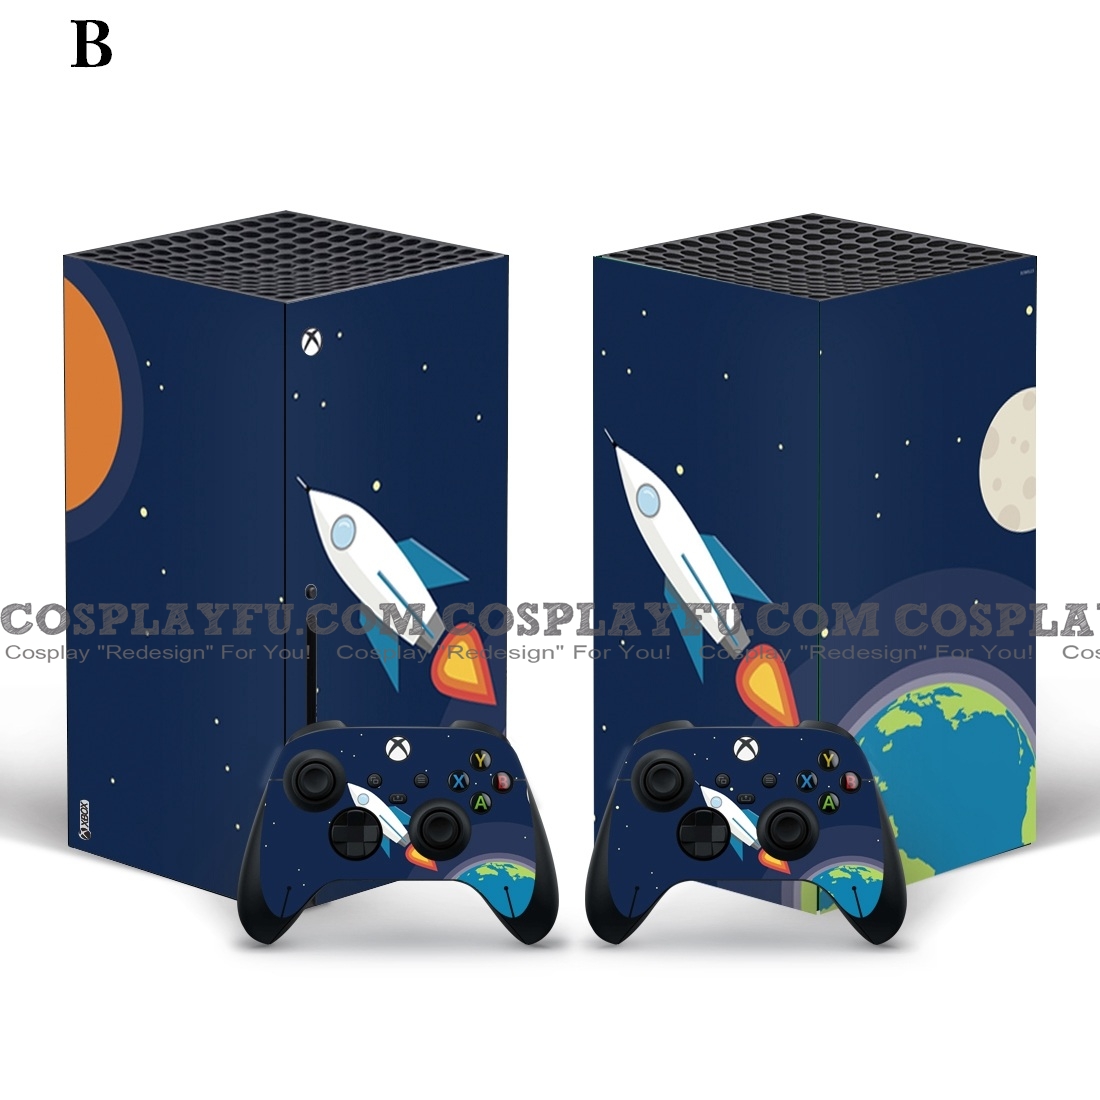 Space Skin Decal Pour Xbox Series X Console And Controller, Plein Wrap Vinyl Cosplay